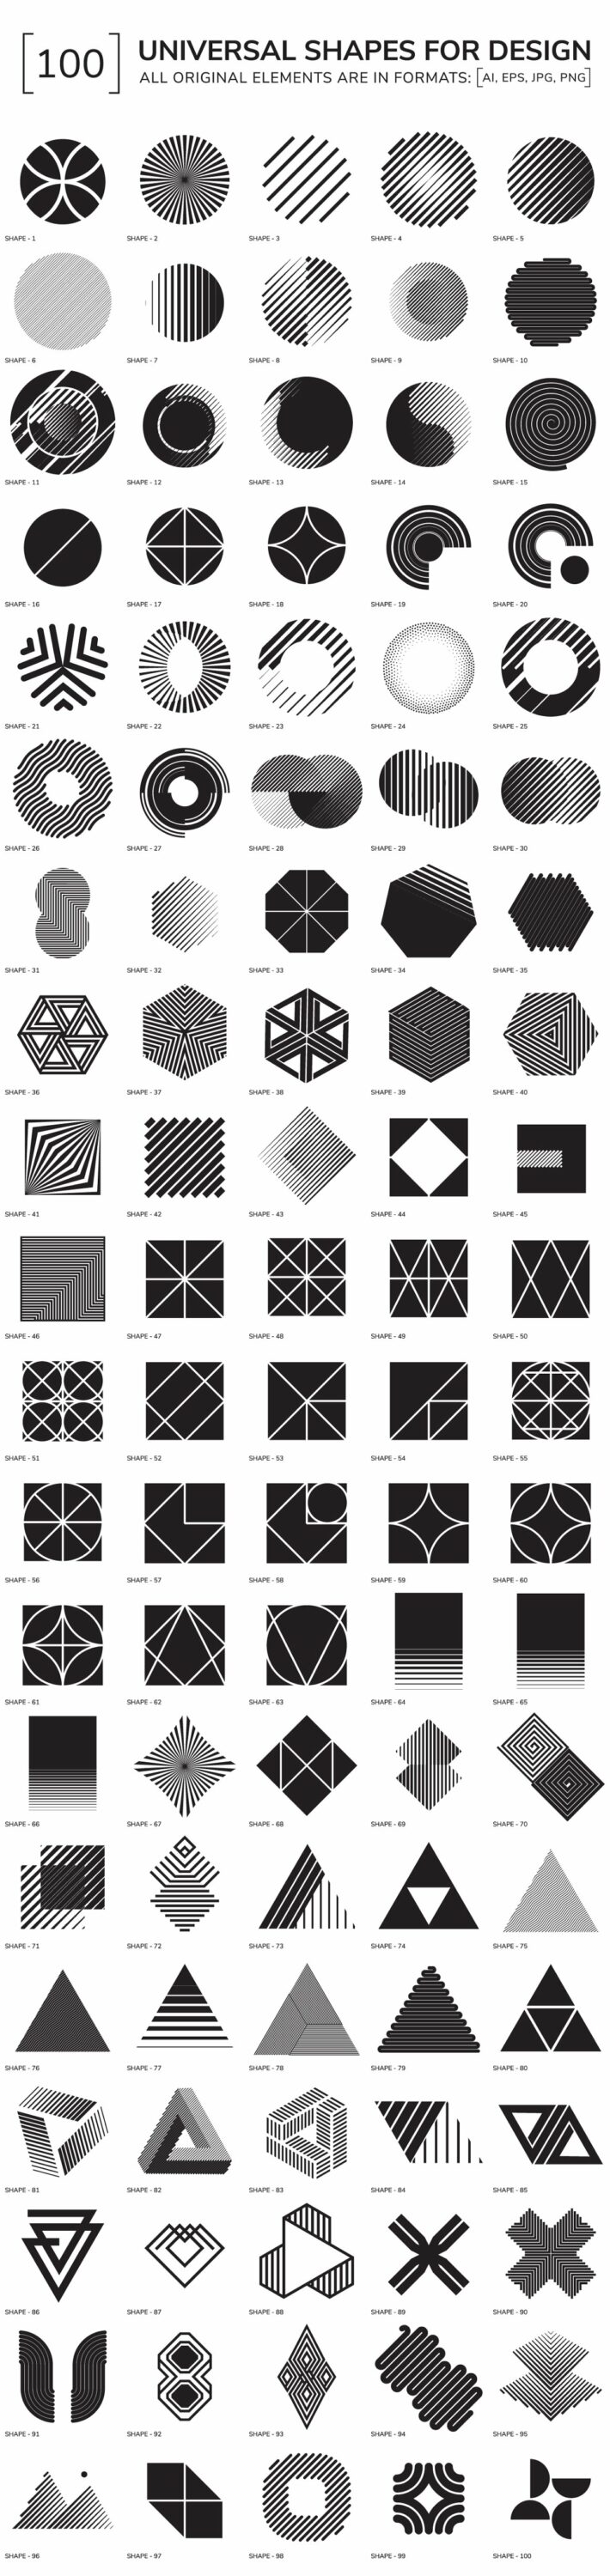 Beautiful black and white drawings of various shapes for any prints.